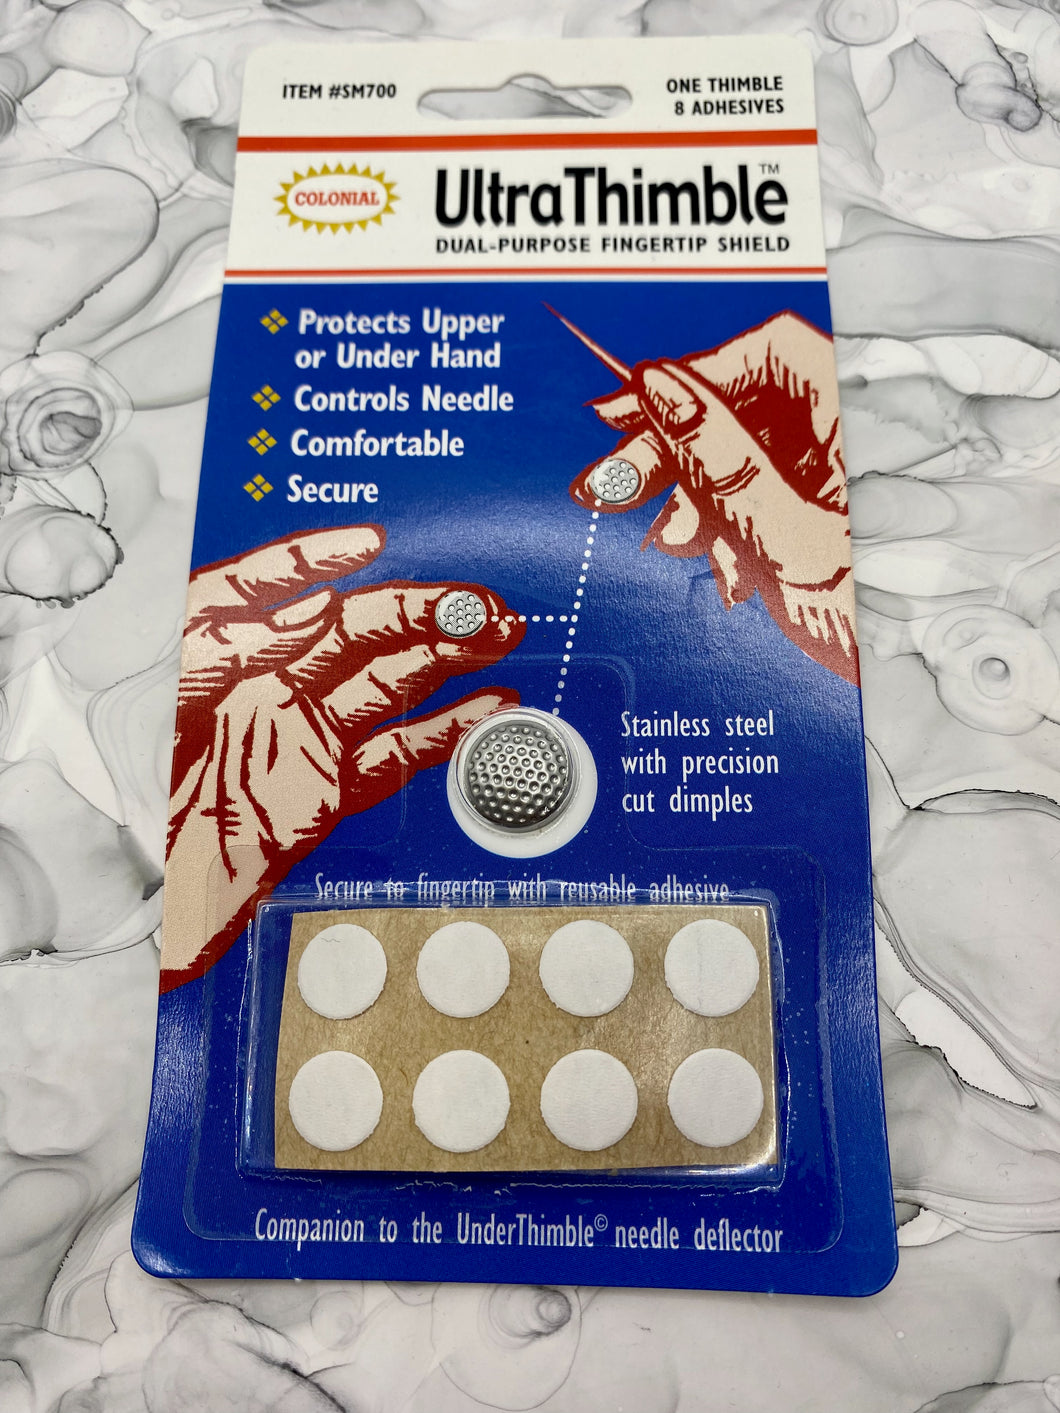 Ultra Thimble: Dual-Purpose Fingertip Shield by Colonial